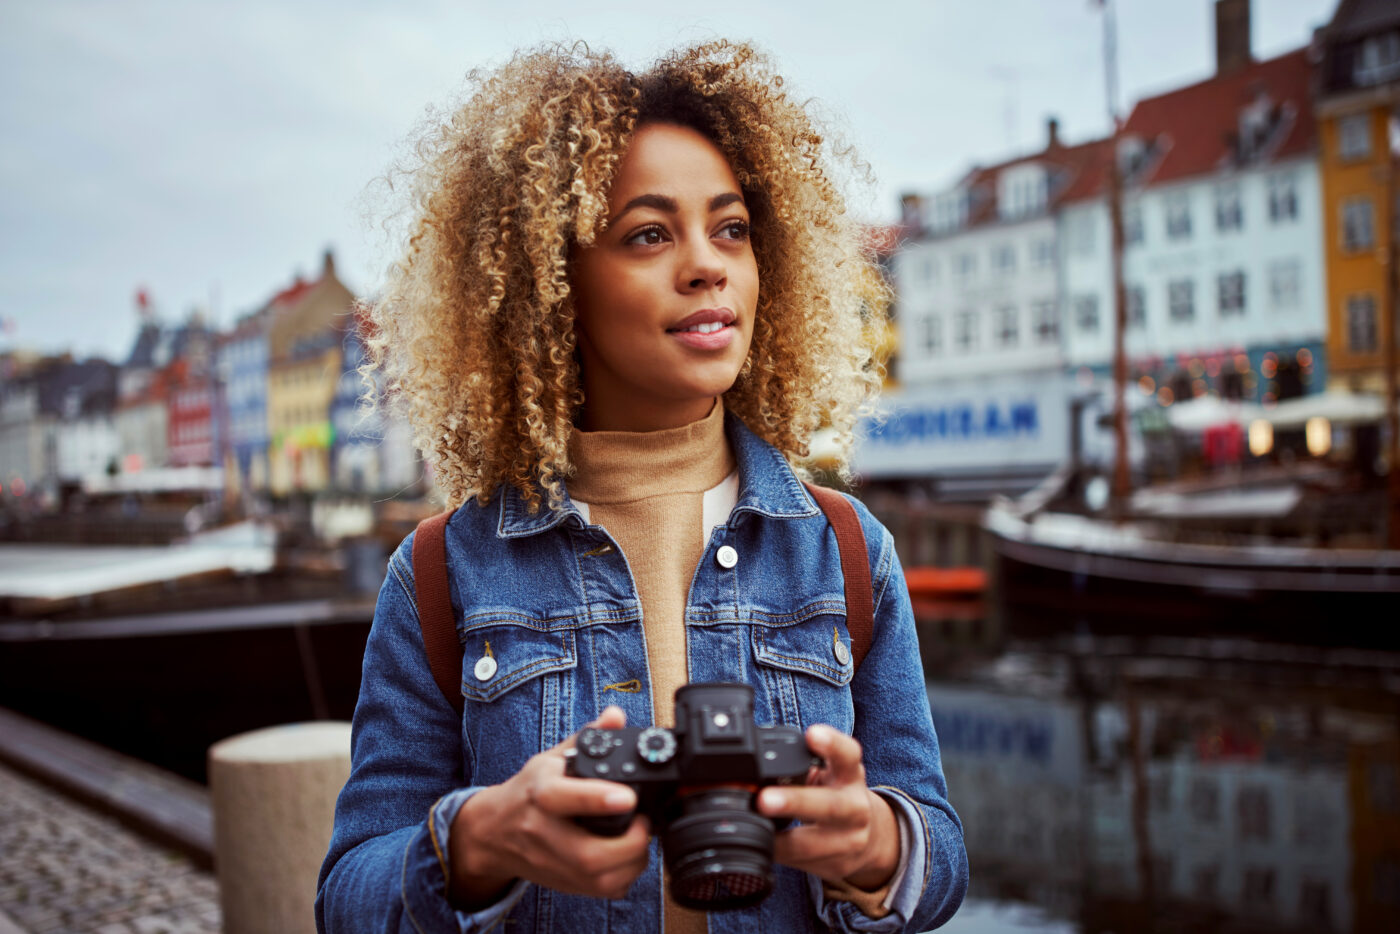 Shot of a young woman out with her camera